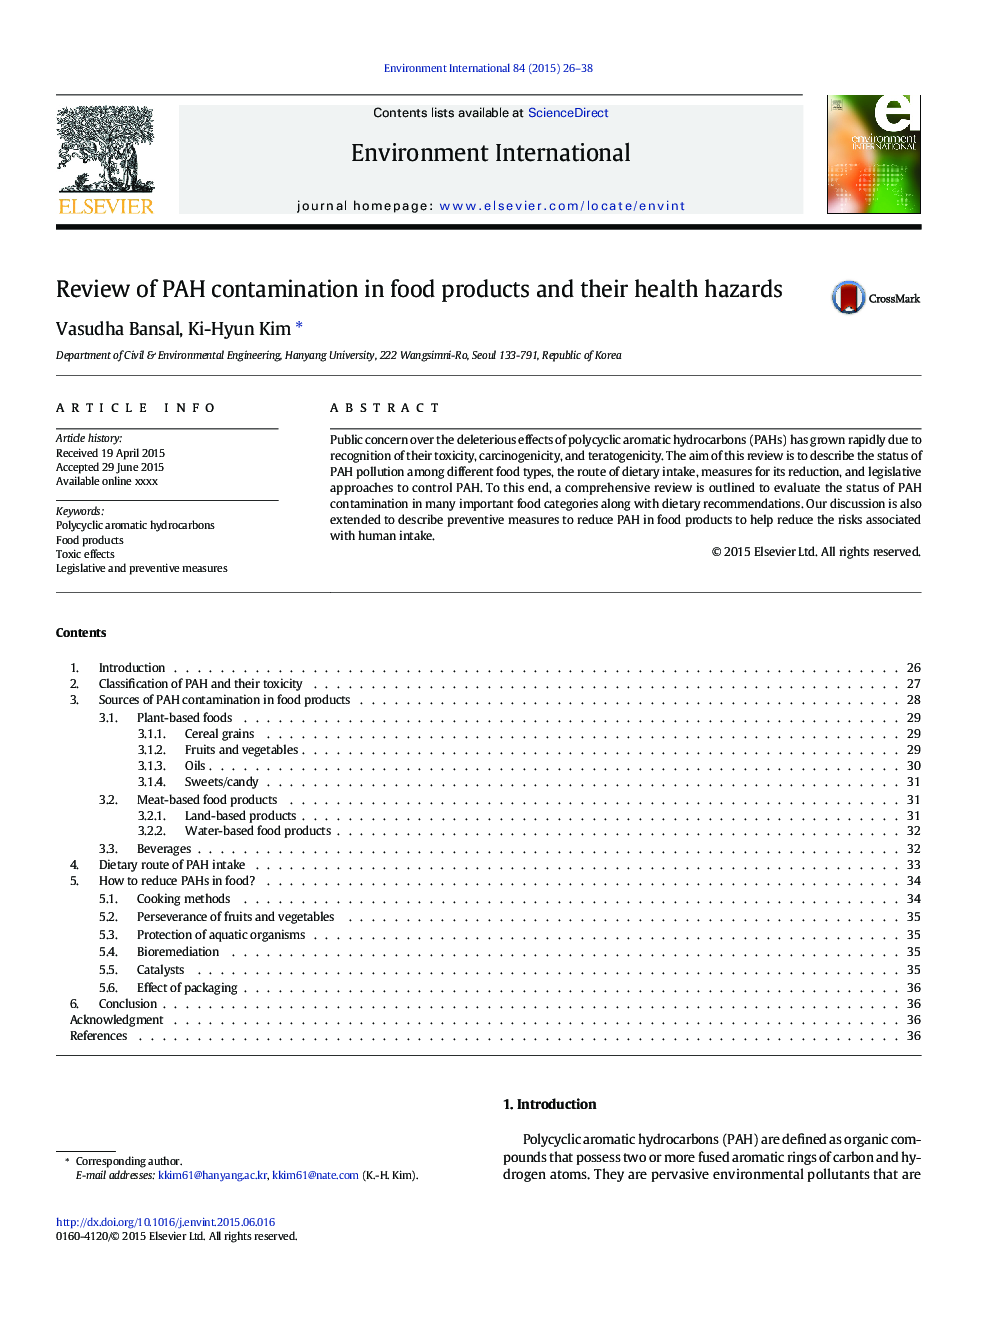 Review of PAH contamination in food products and their health hazards